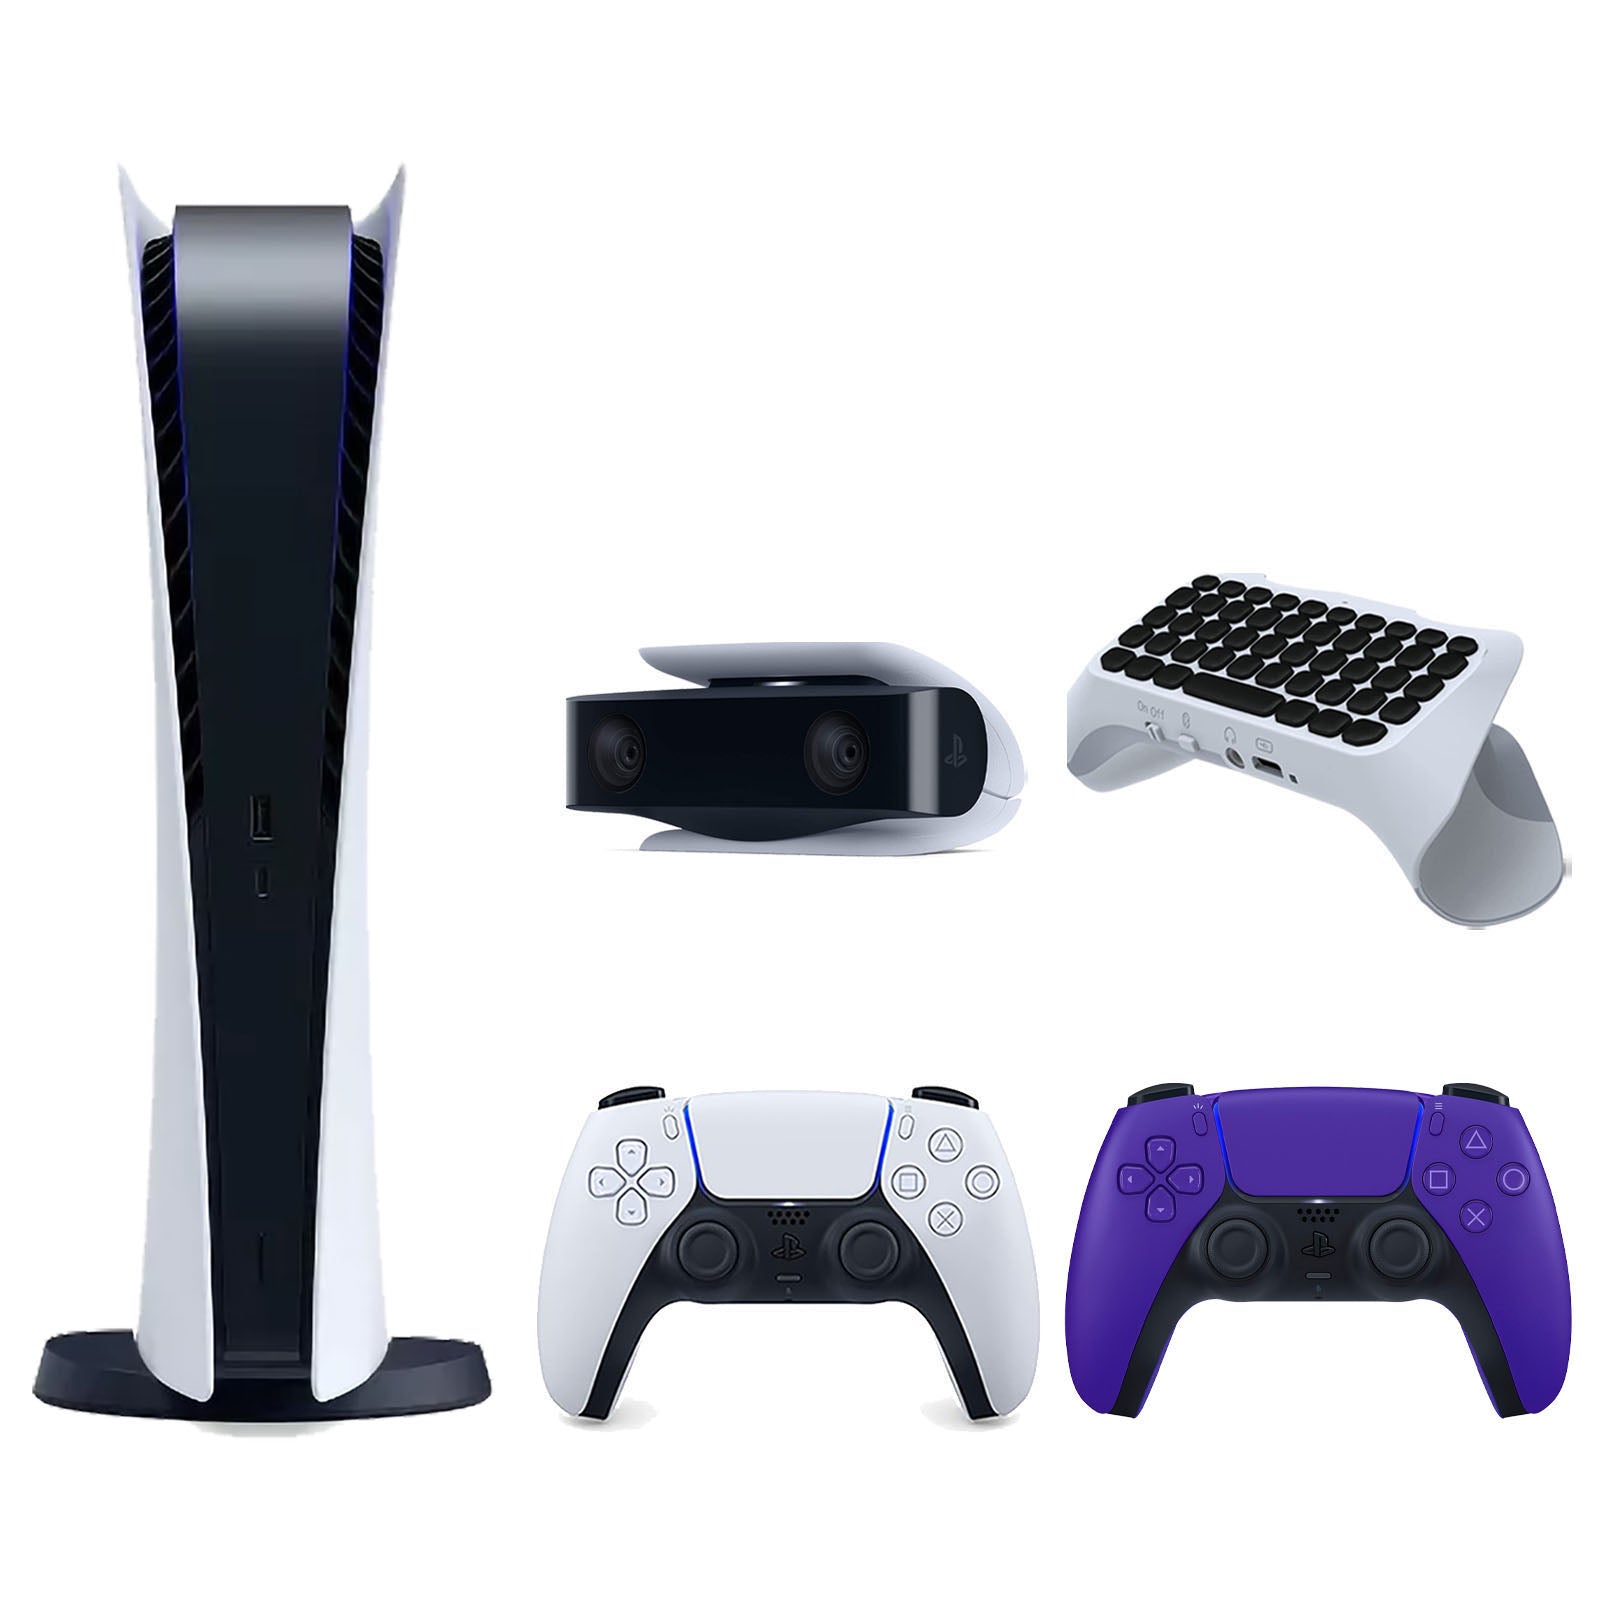 Sony Playstation 5 Digital Edition Console with Extra Purple Controller, 1080p HD Camera and Surge QuickType 2.0 Wireless PS5 Controller Keypad Bundle - Pro-Distributing